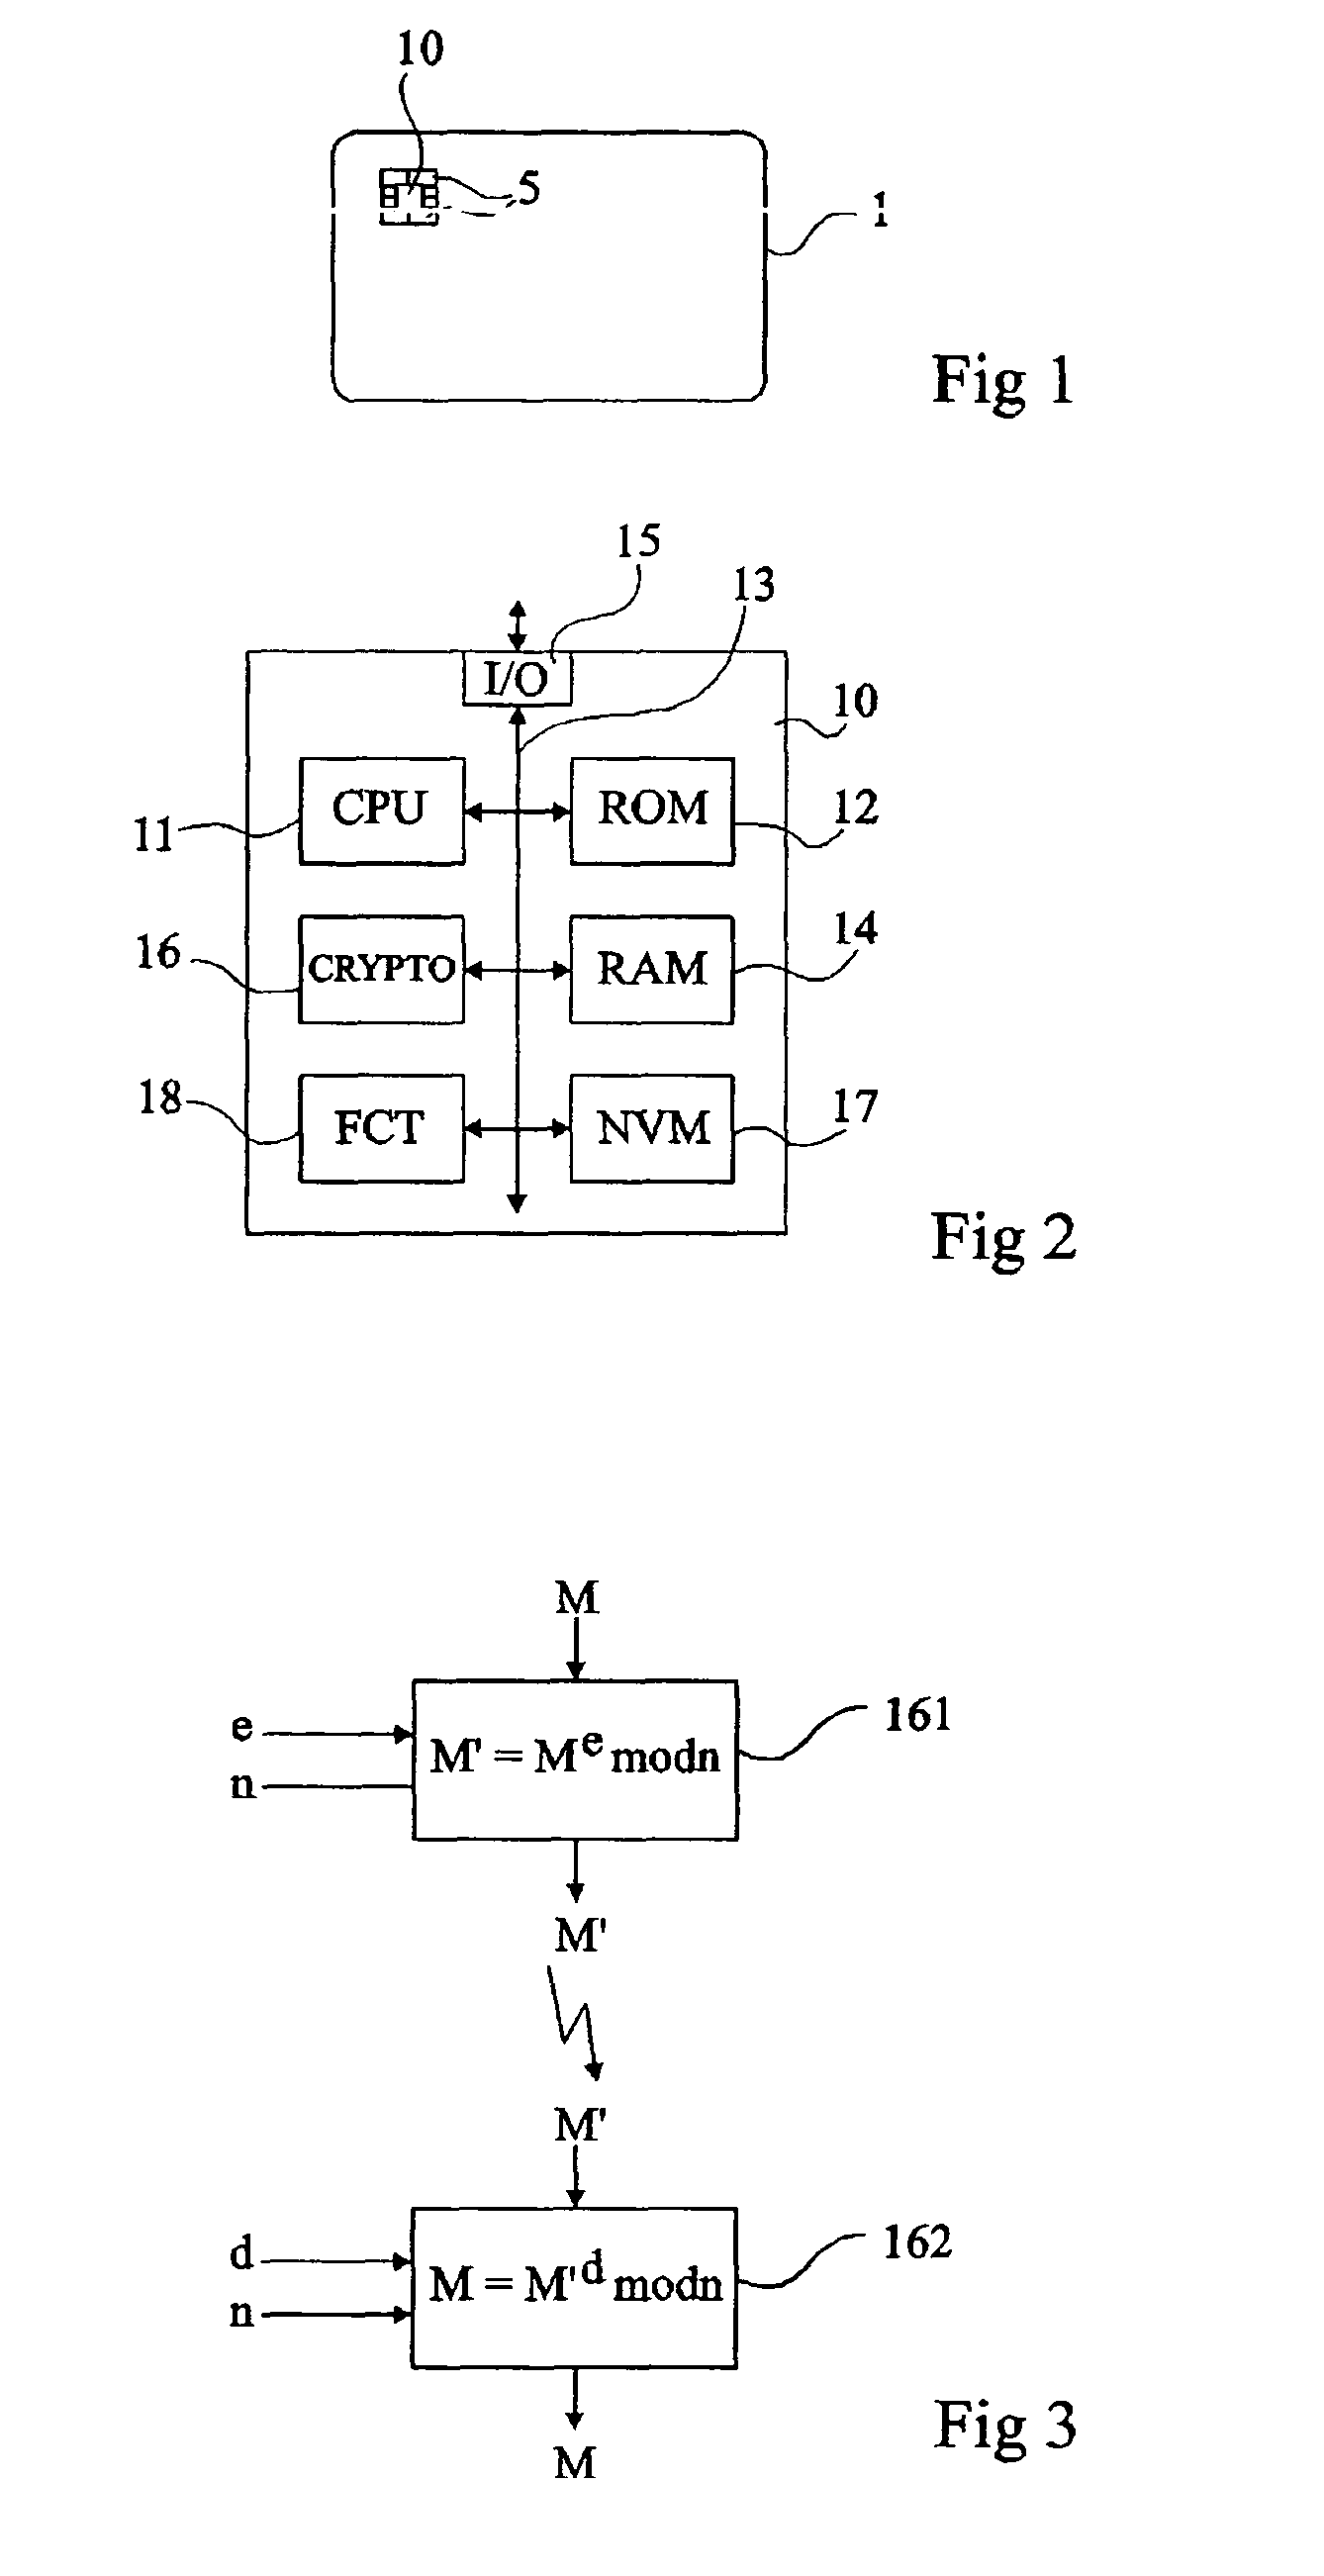 Protection of a calculation performed by an integrated circuit